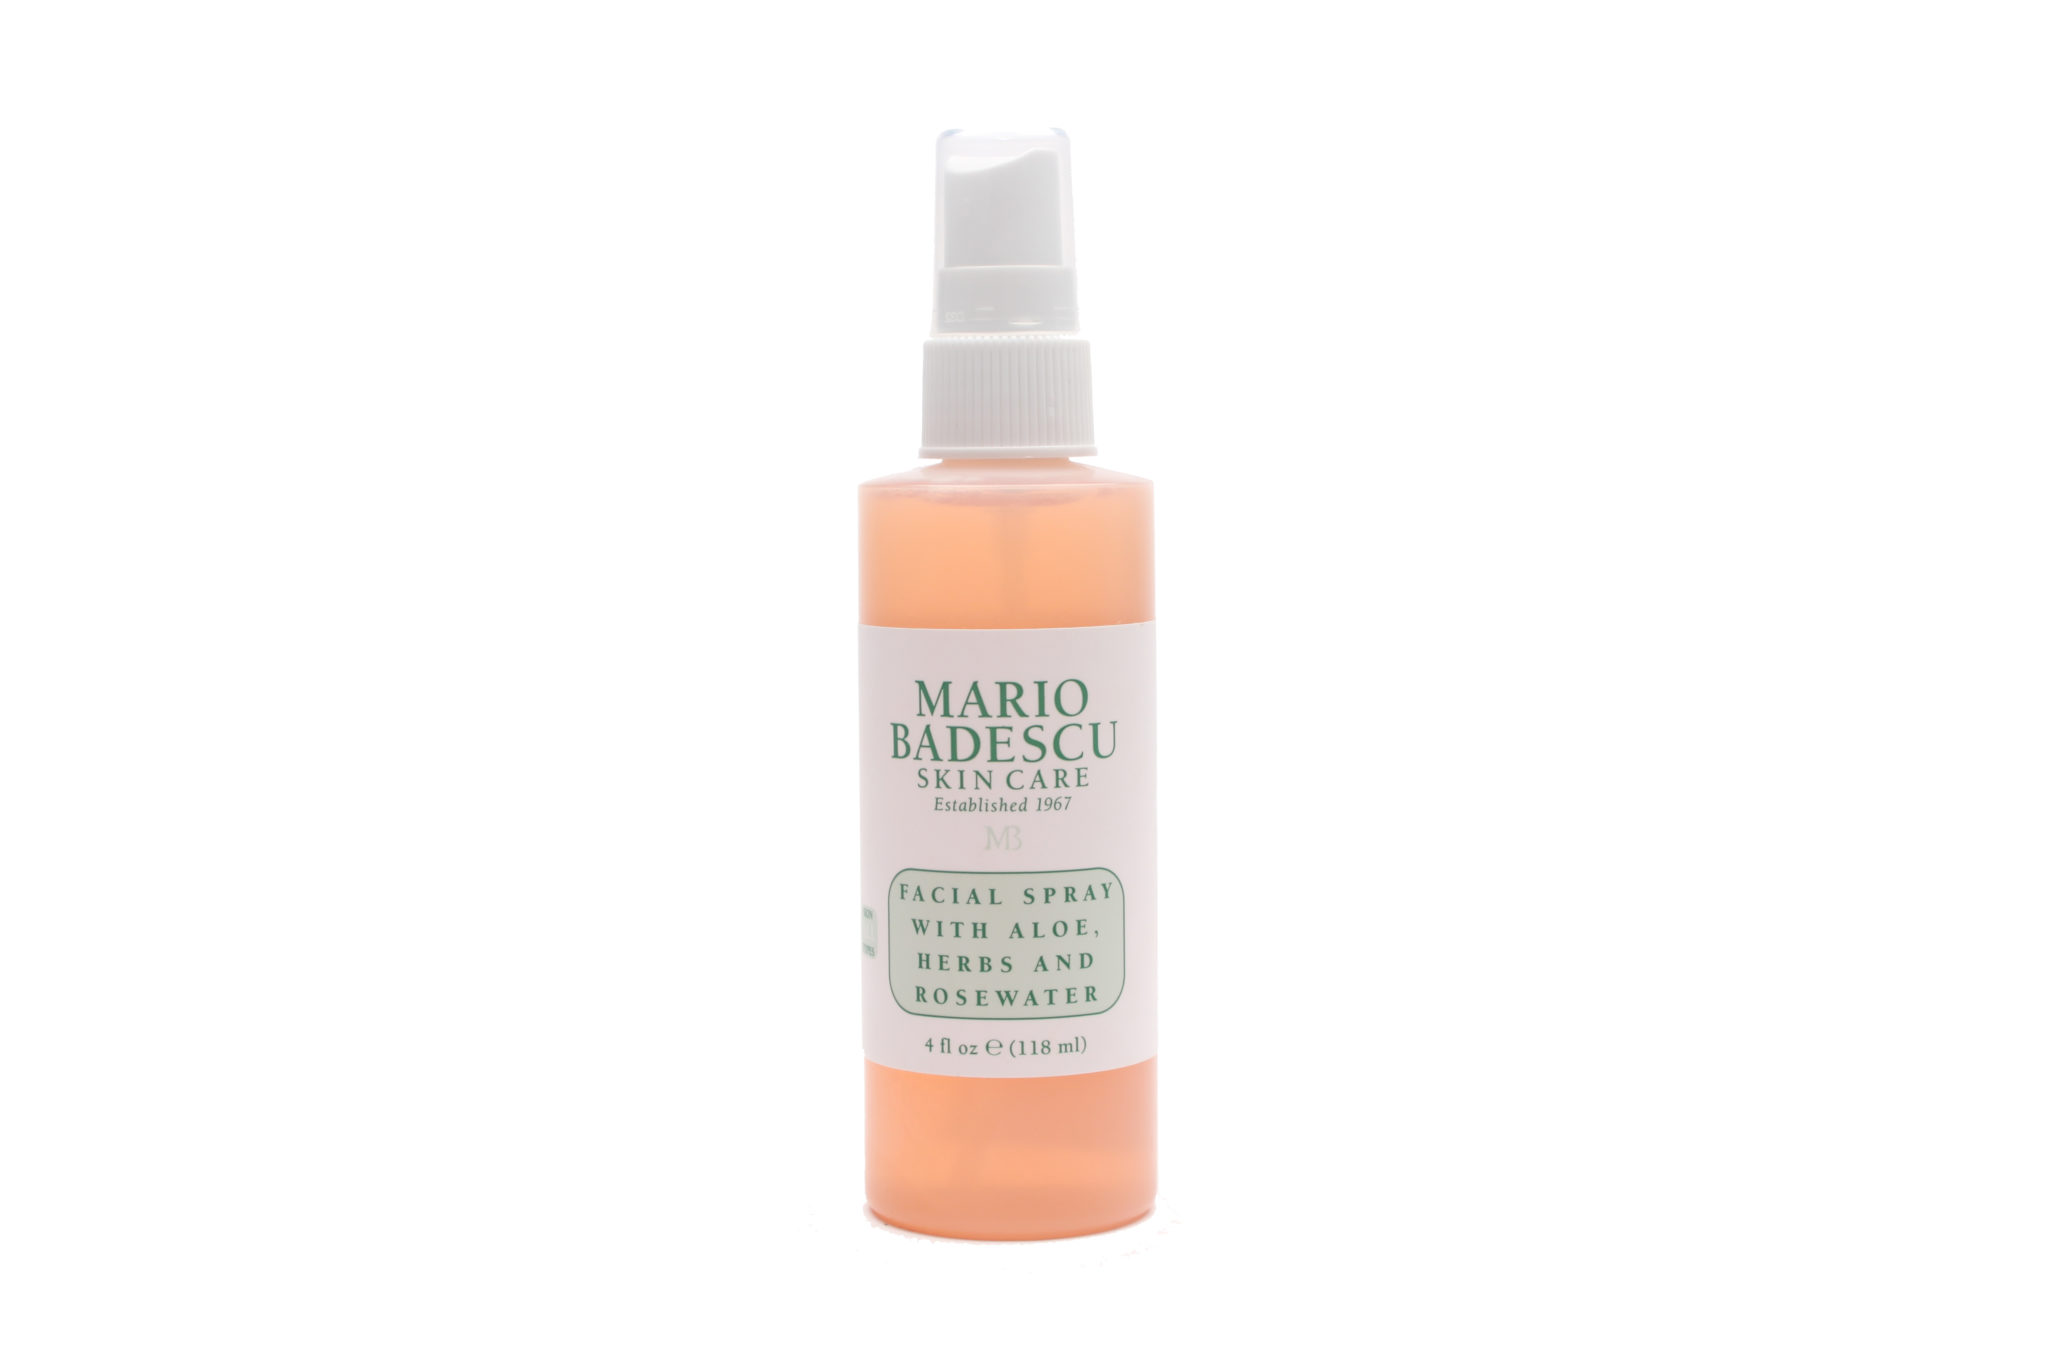 What's In Your Skin Care? Gardenia Extract – Mario Badescu